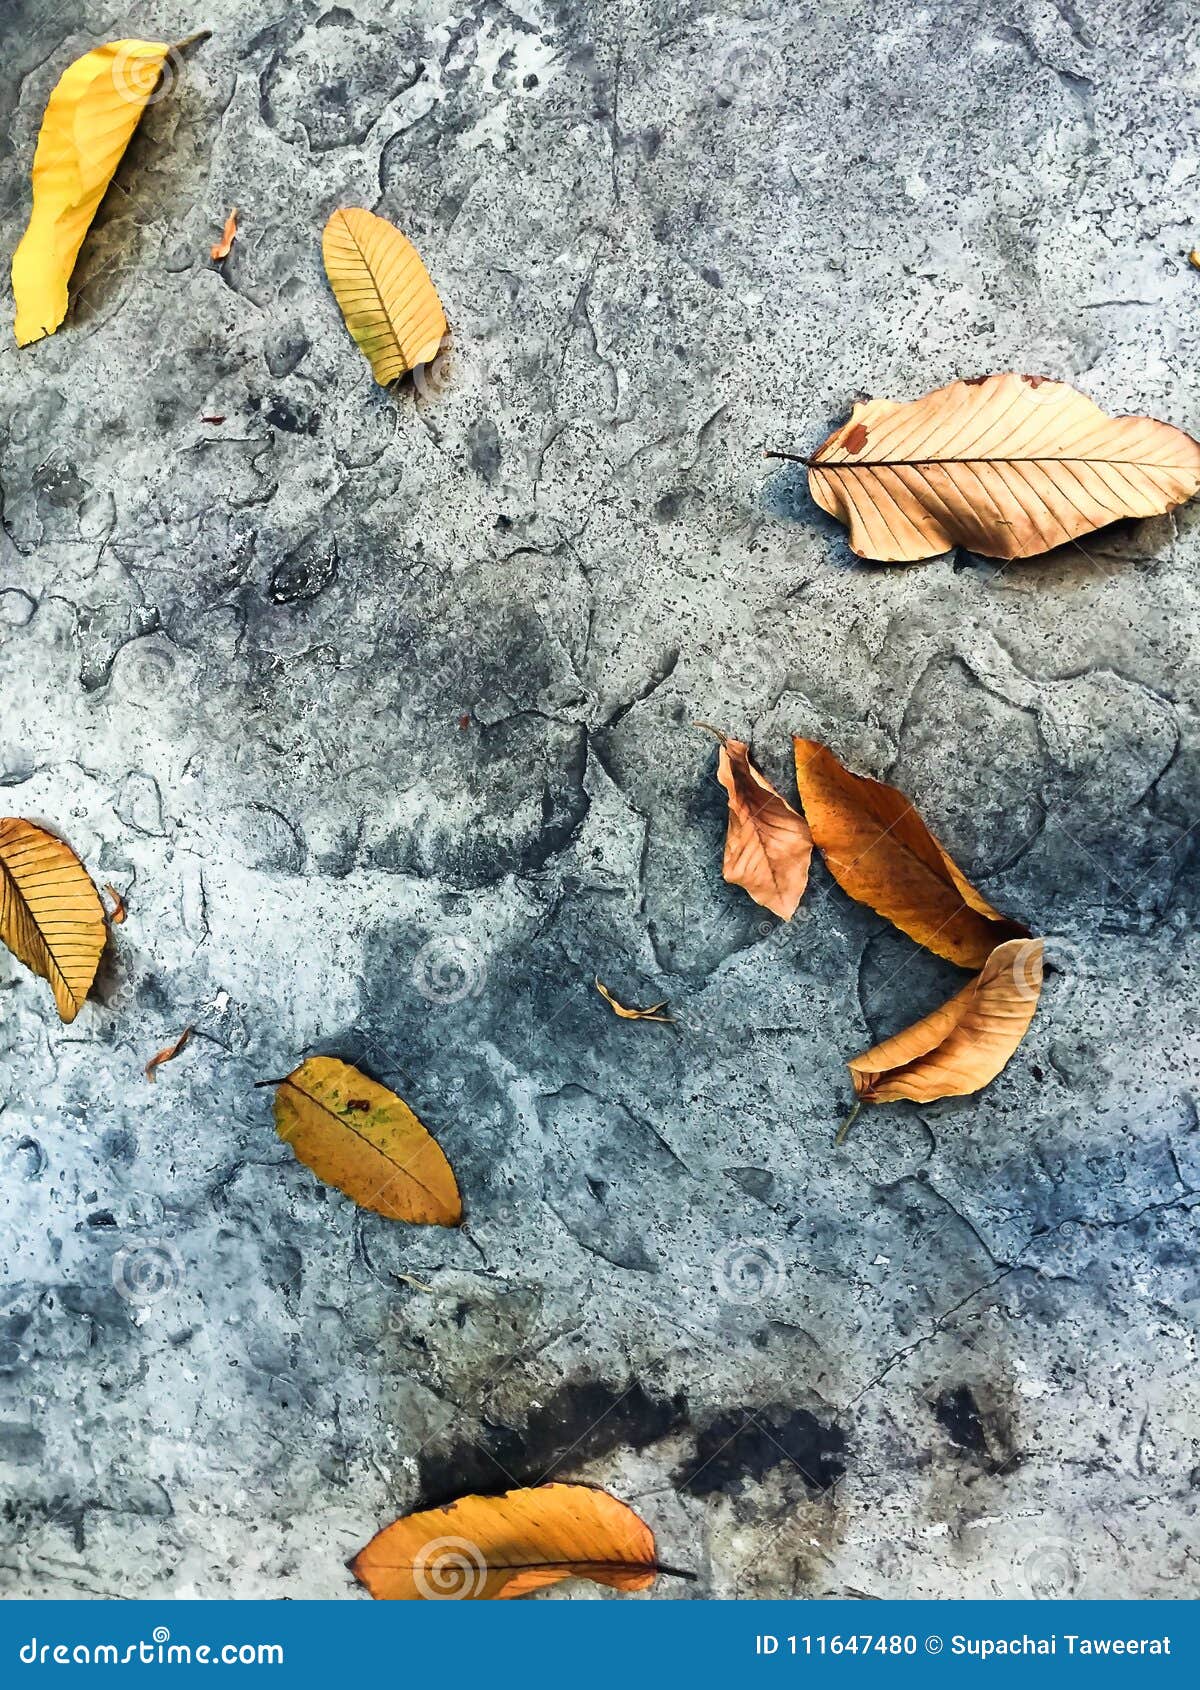 Leaves on concrete floor stock photo. Image of pattern - 111647480